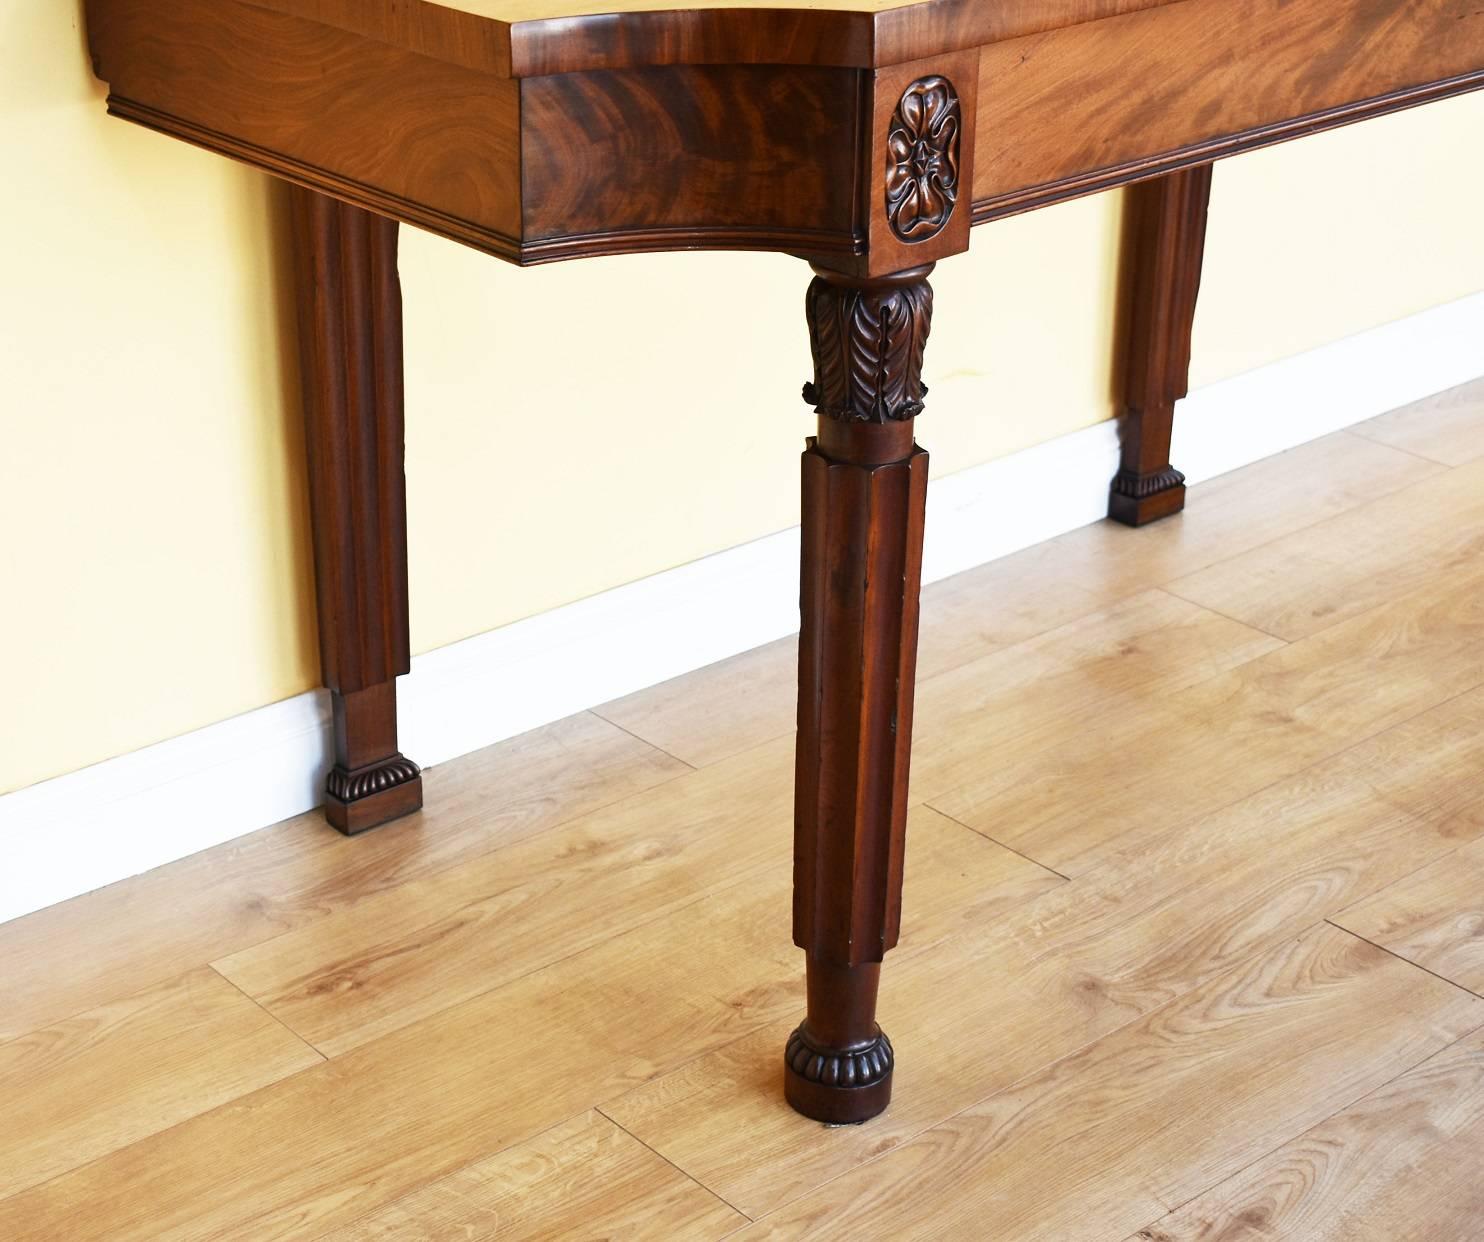 For sale is a good quality Regency Mahogany serving table, with a single fitted drawer, standing on elegantly turned legs. This piece is in excellent condition having been re-finished using traditional methods. 

Width: 66